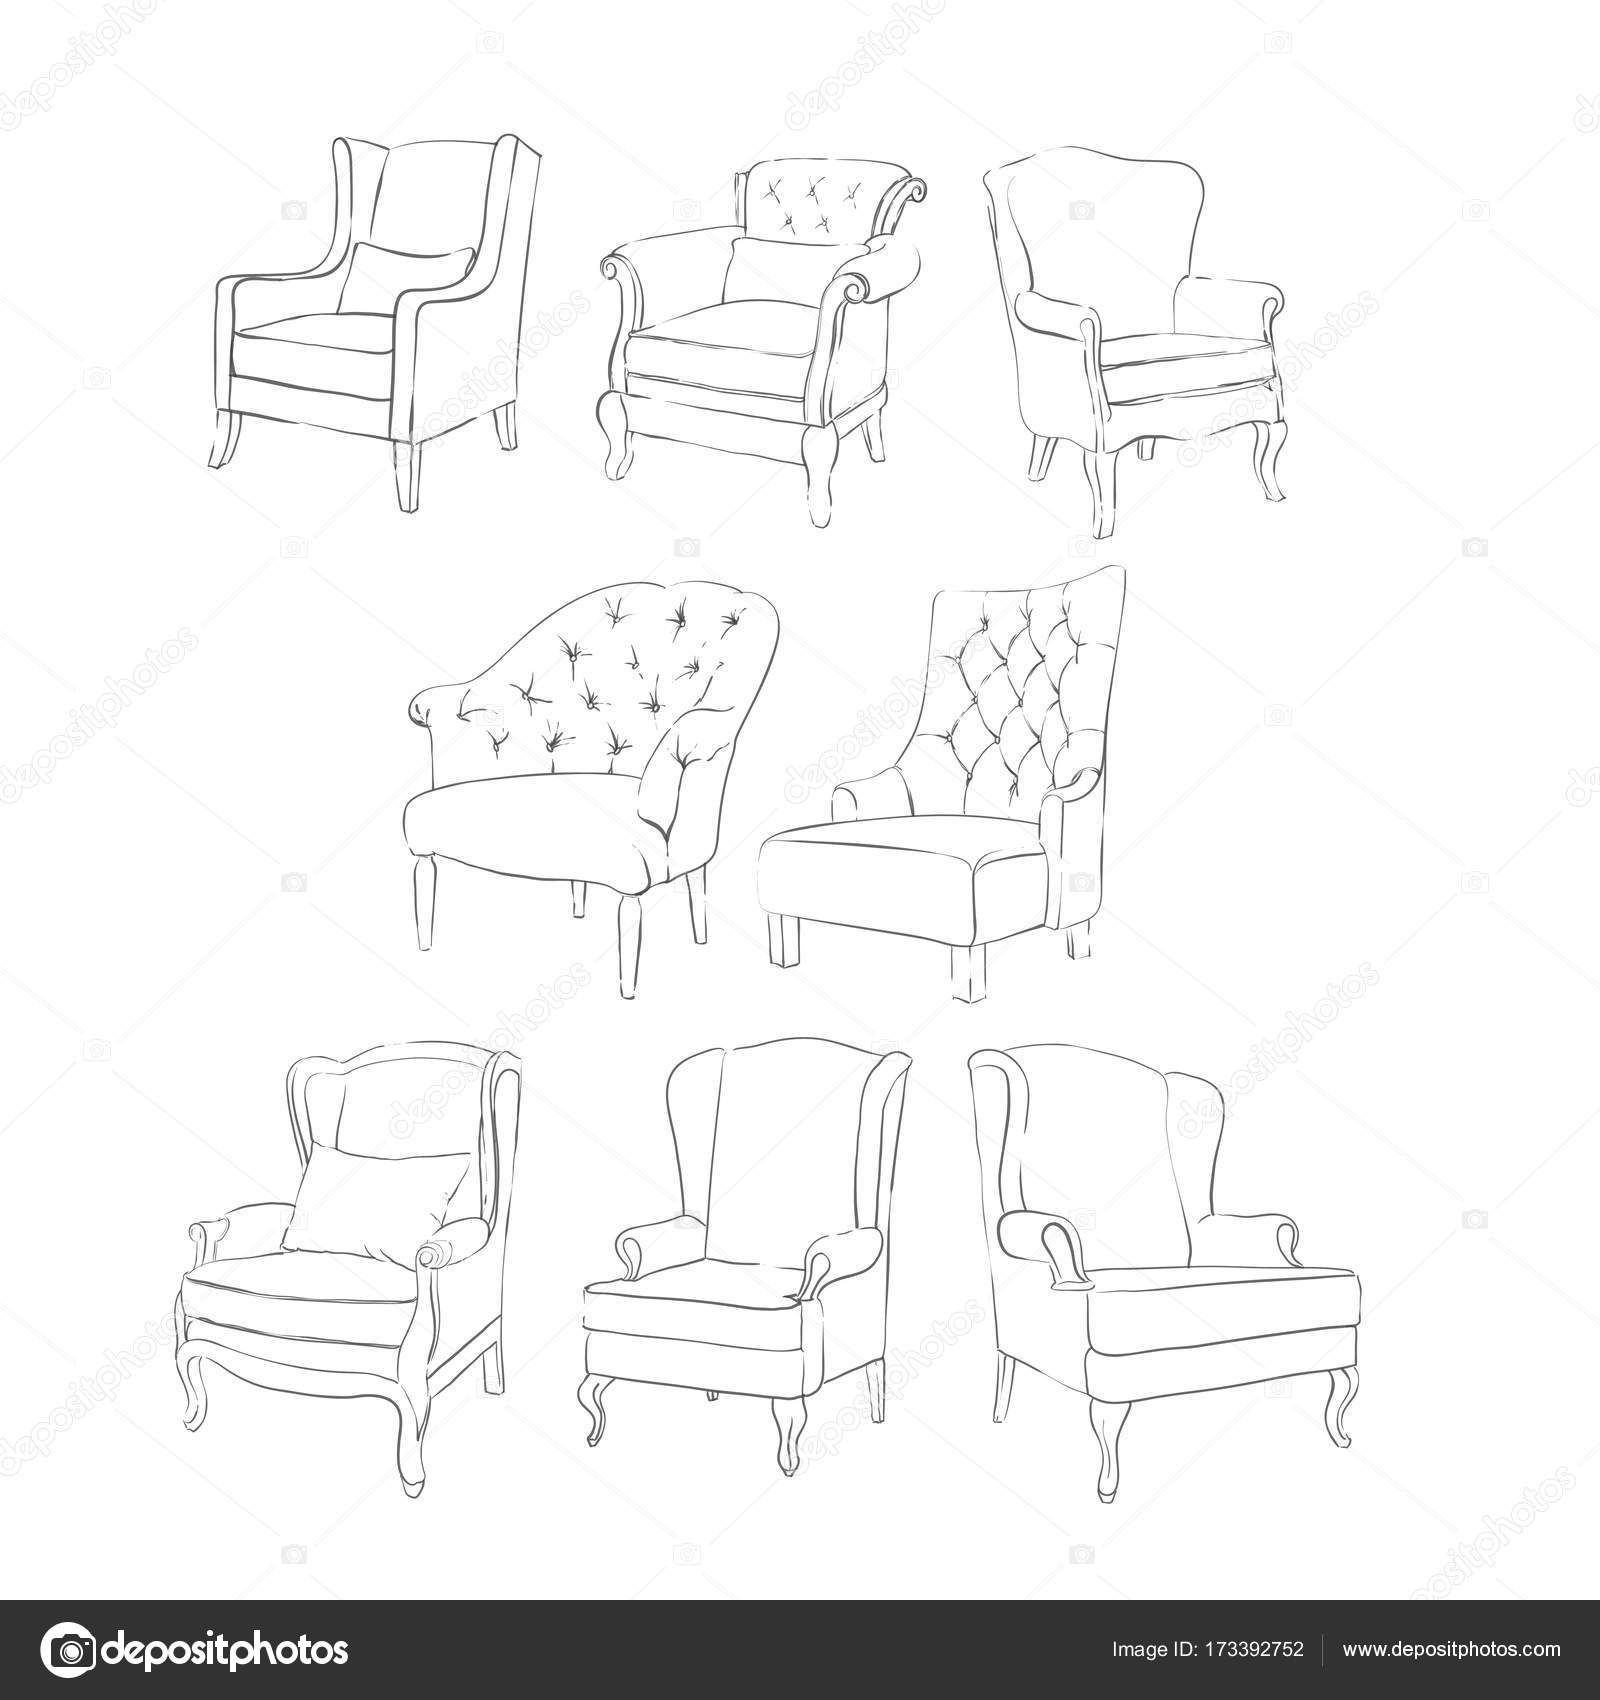 Drawings Pencil Sketches Of Chairs Exquisite Pencil Drawing